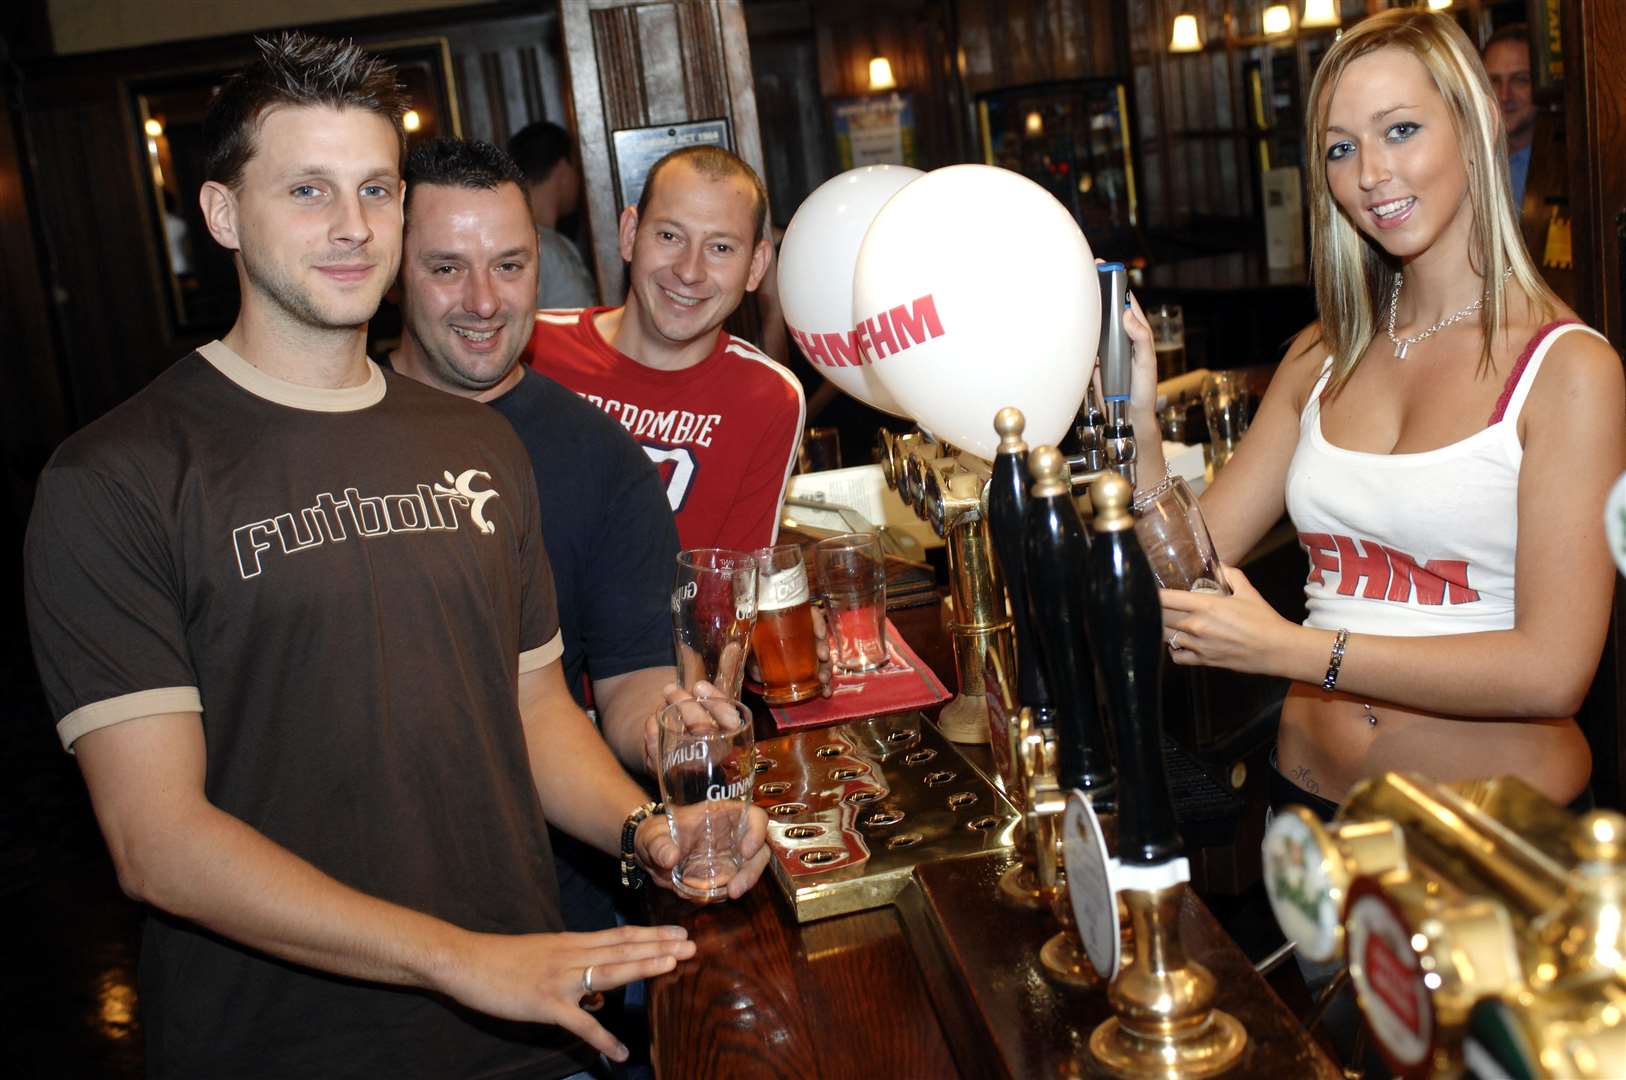 Laura Gilchrist who worked at the Daylight Inn in Petts Wood was shortlisted in the High Street Honey competition organized by FHM in October 2007. The pub is still going today. Picture: Matthew Reading